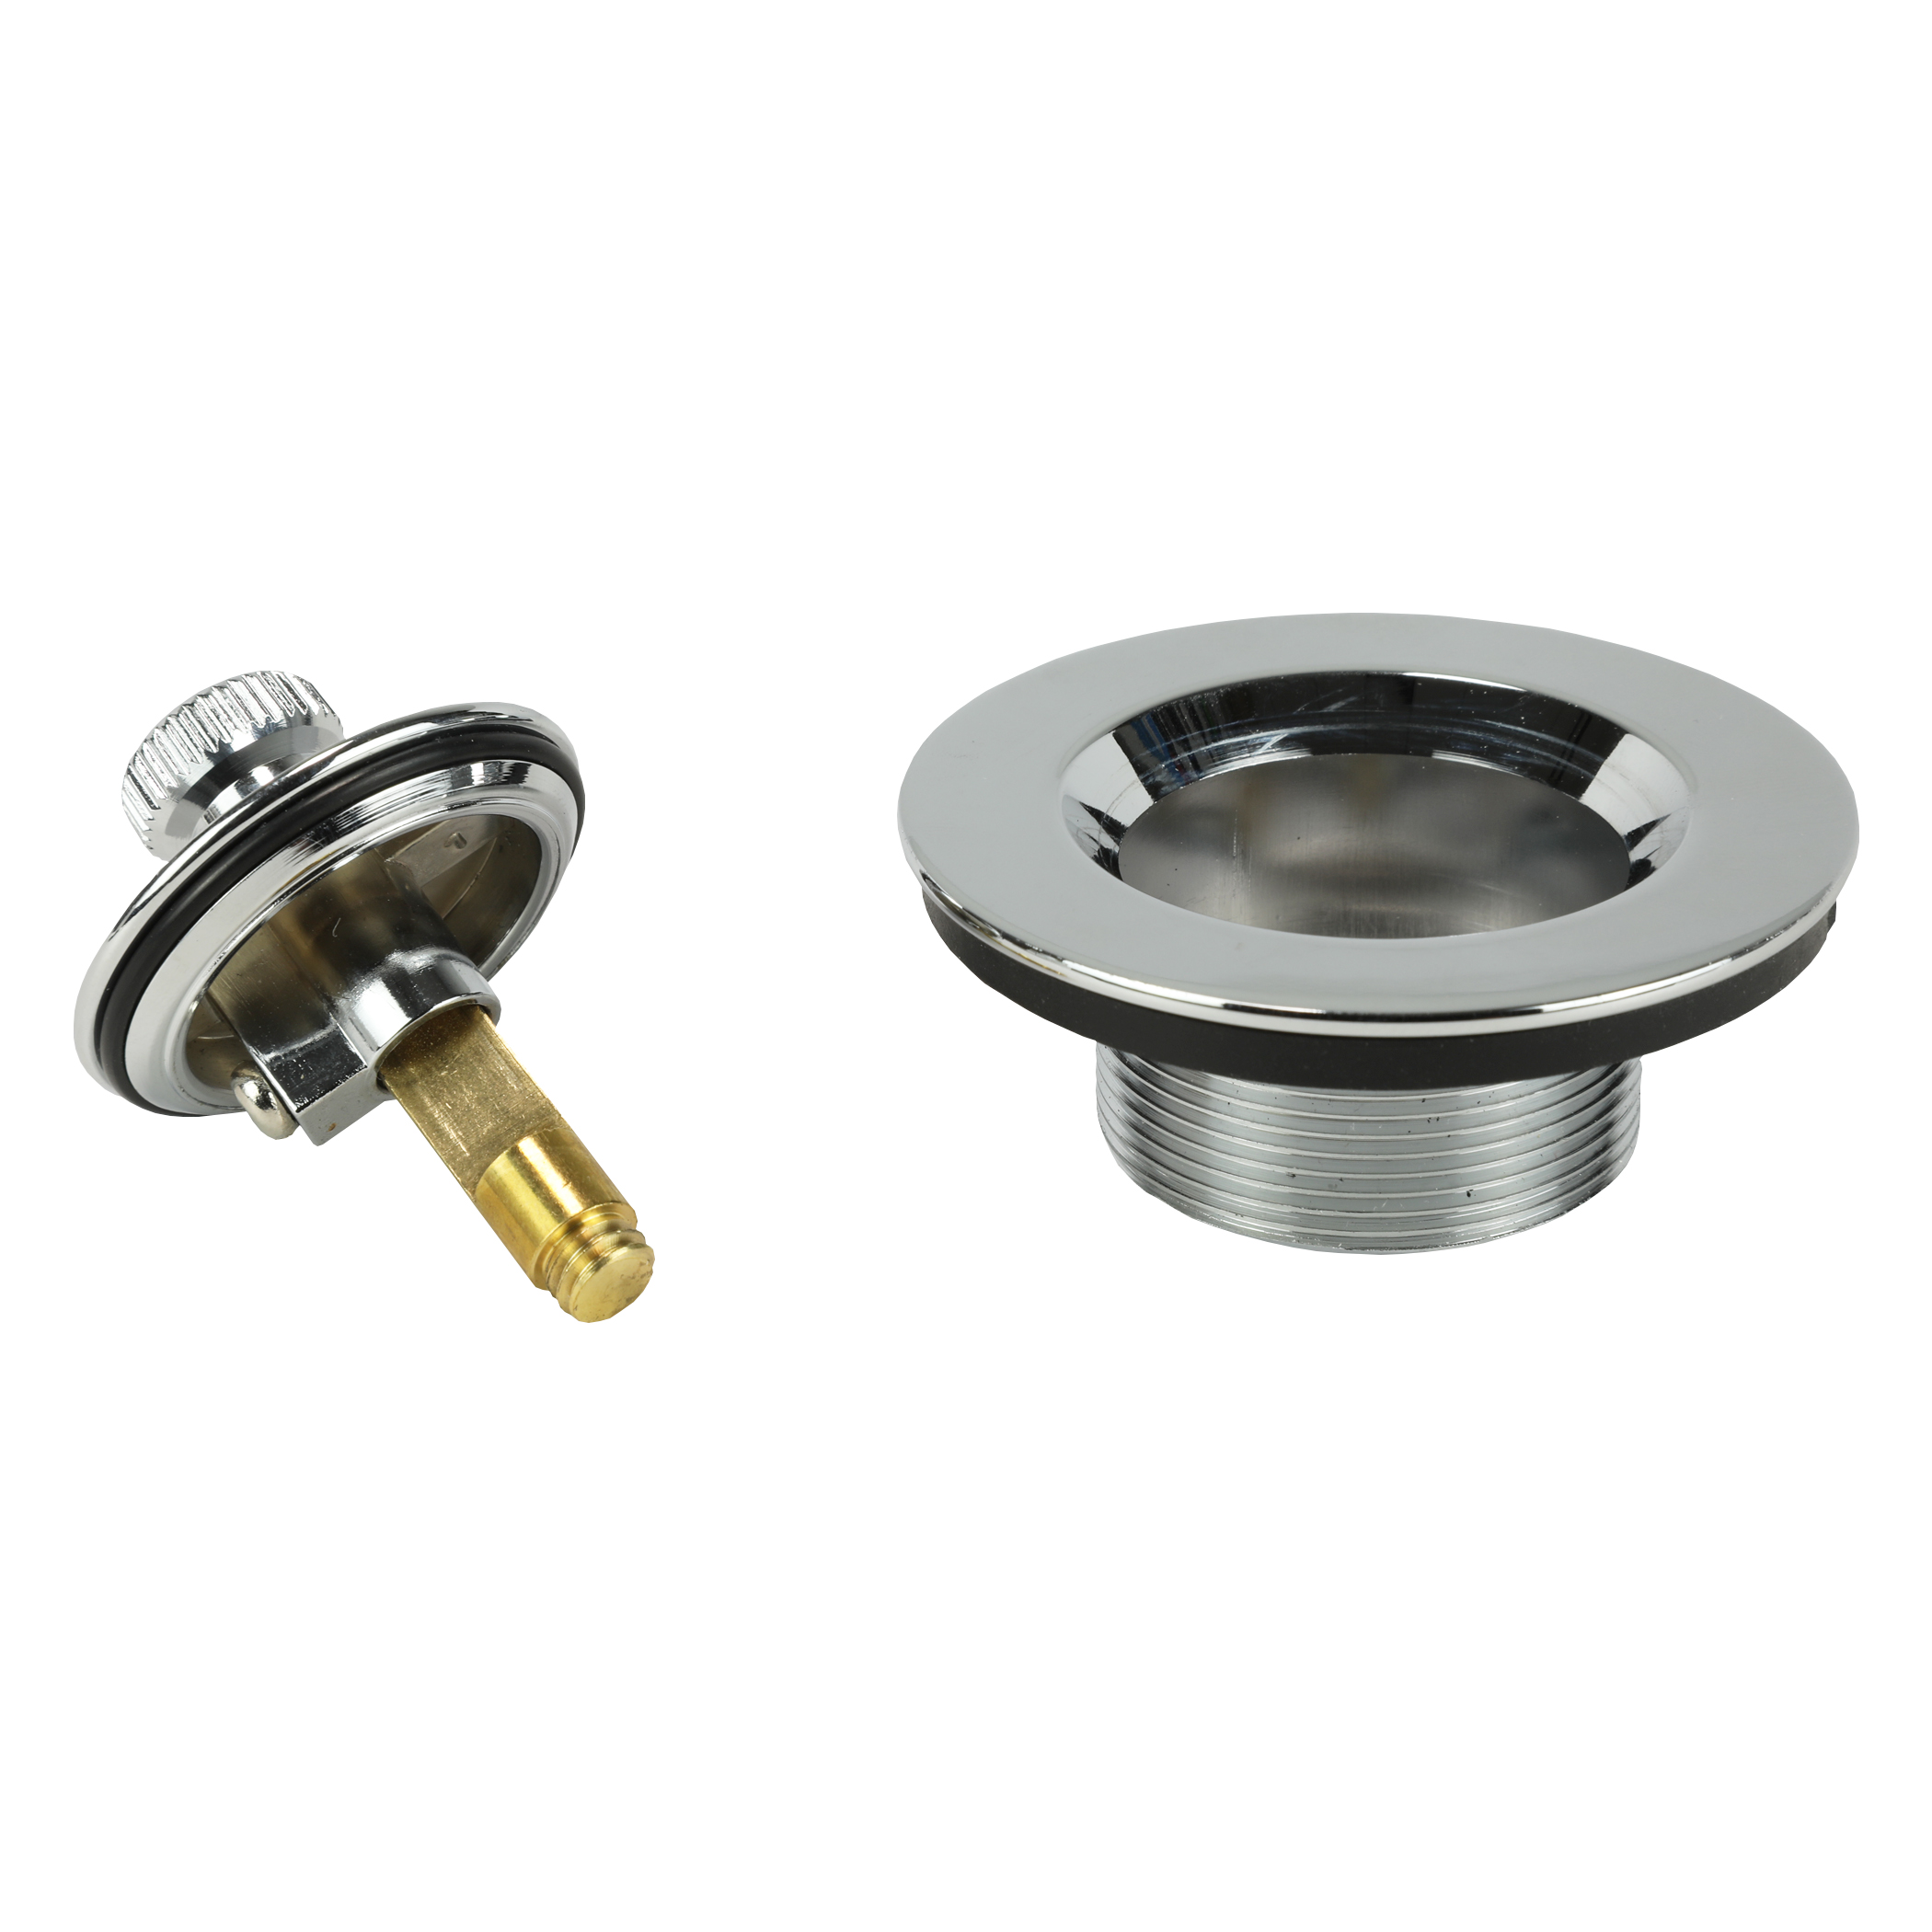 1-5/8 in. Twist N’ Close Tub Stopper for Pfister in Chrome